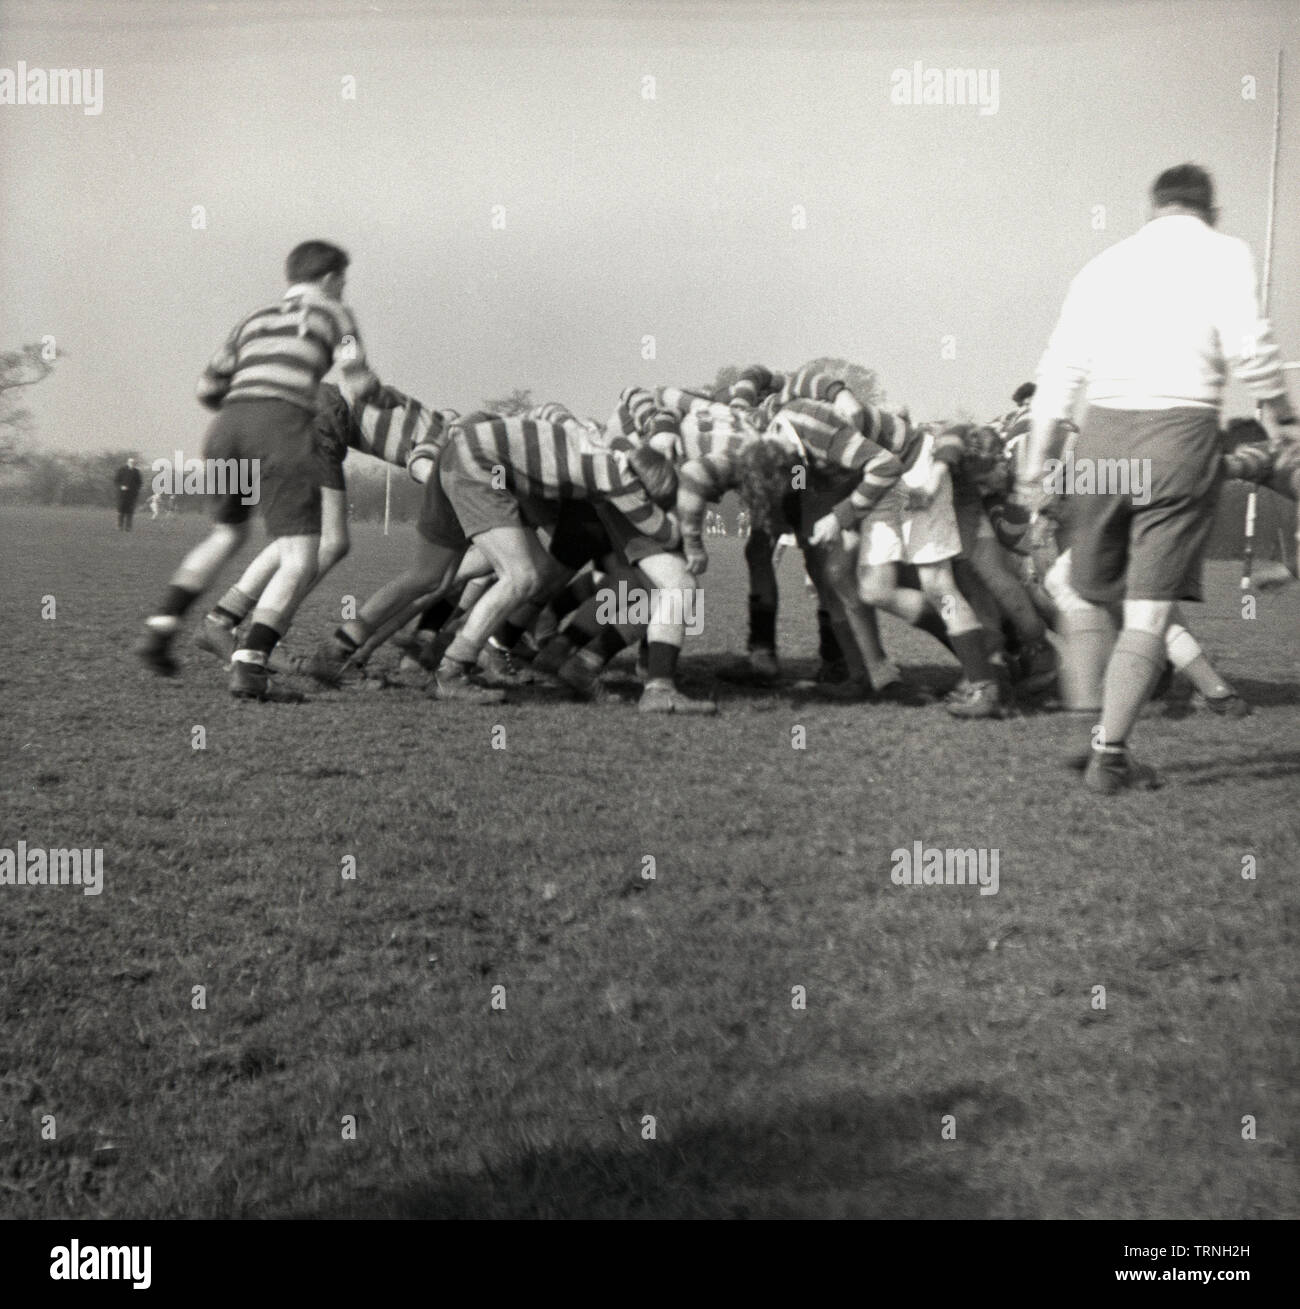 1950s, historical, amateur rugby union match, rugby forwards inter-locked with the opposition forwards in a scrum, watched over by the referee, England, UK. Stock Photo